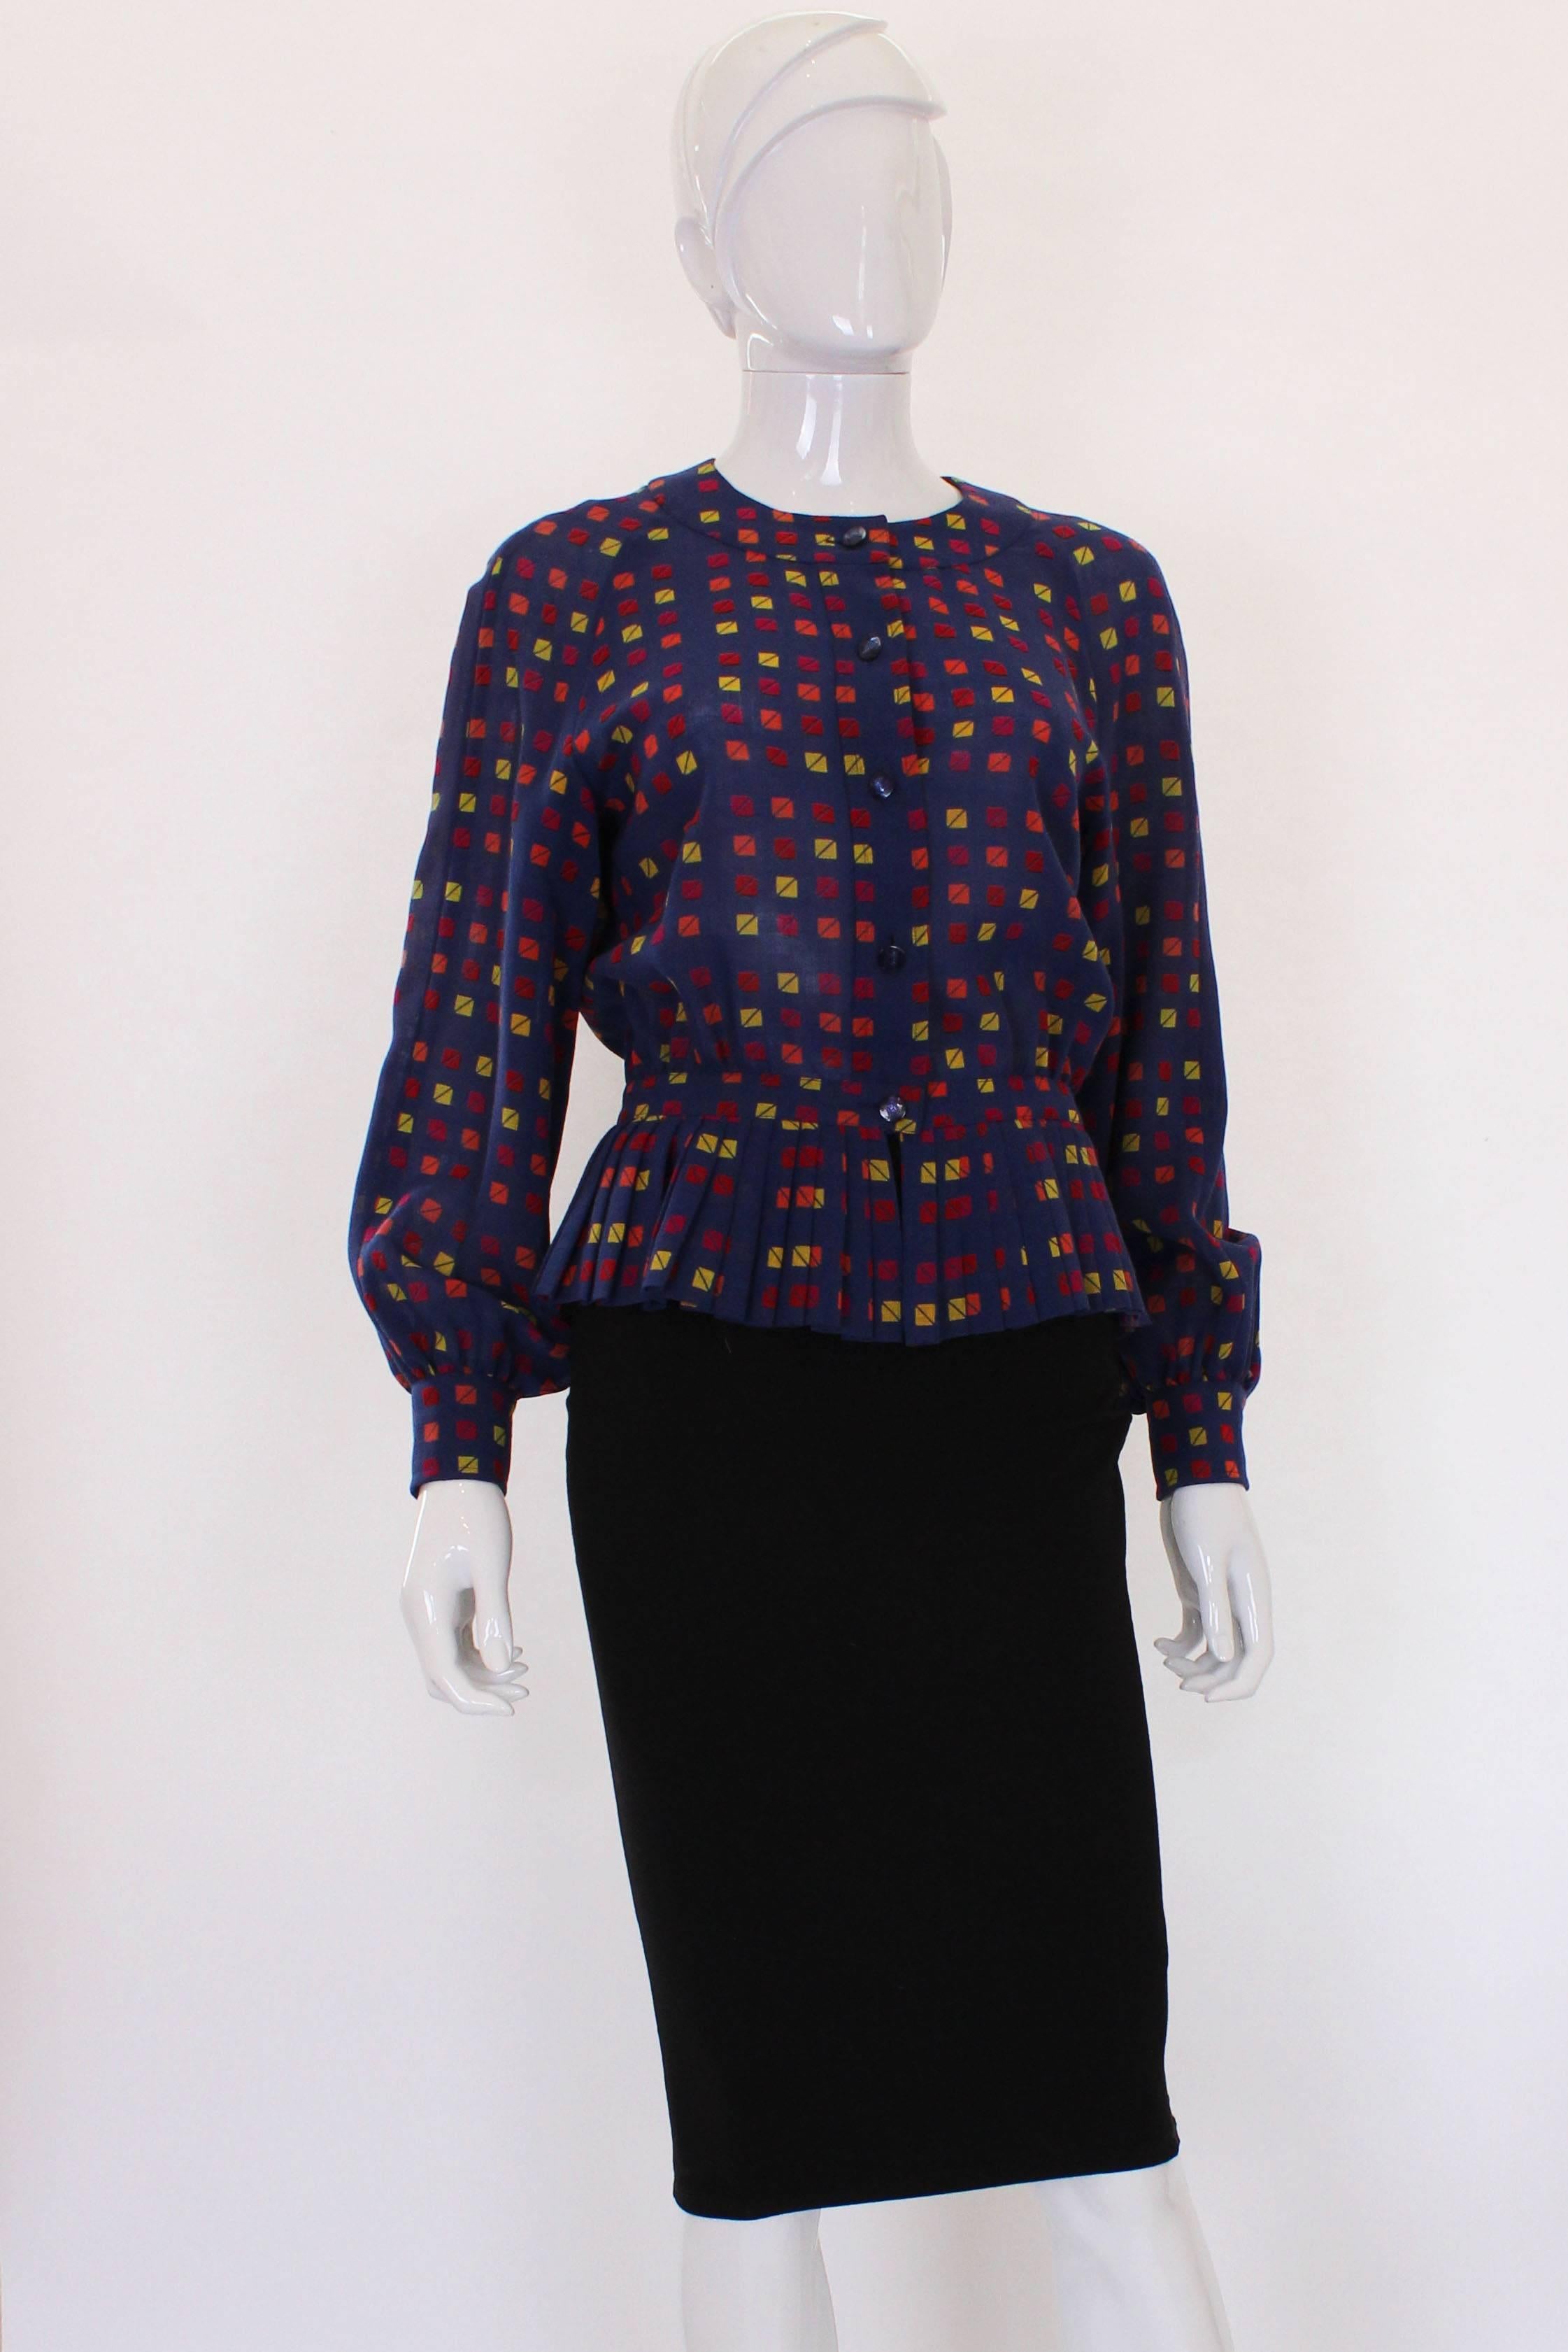 A great top for fall. This top is by French design house Celine,It is 100% wool, with a mauve background and a print in squares of yellow, pink, orange and red.It has a round neck, button front and pleated peplum . There is a 5 button opening at the